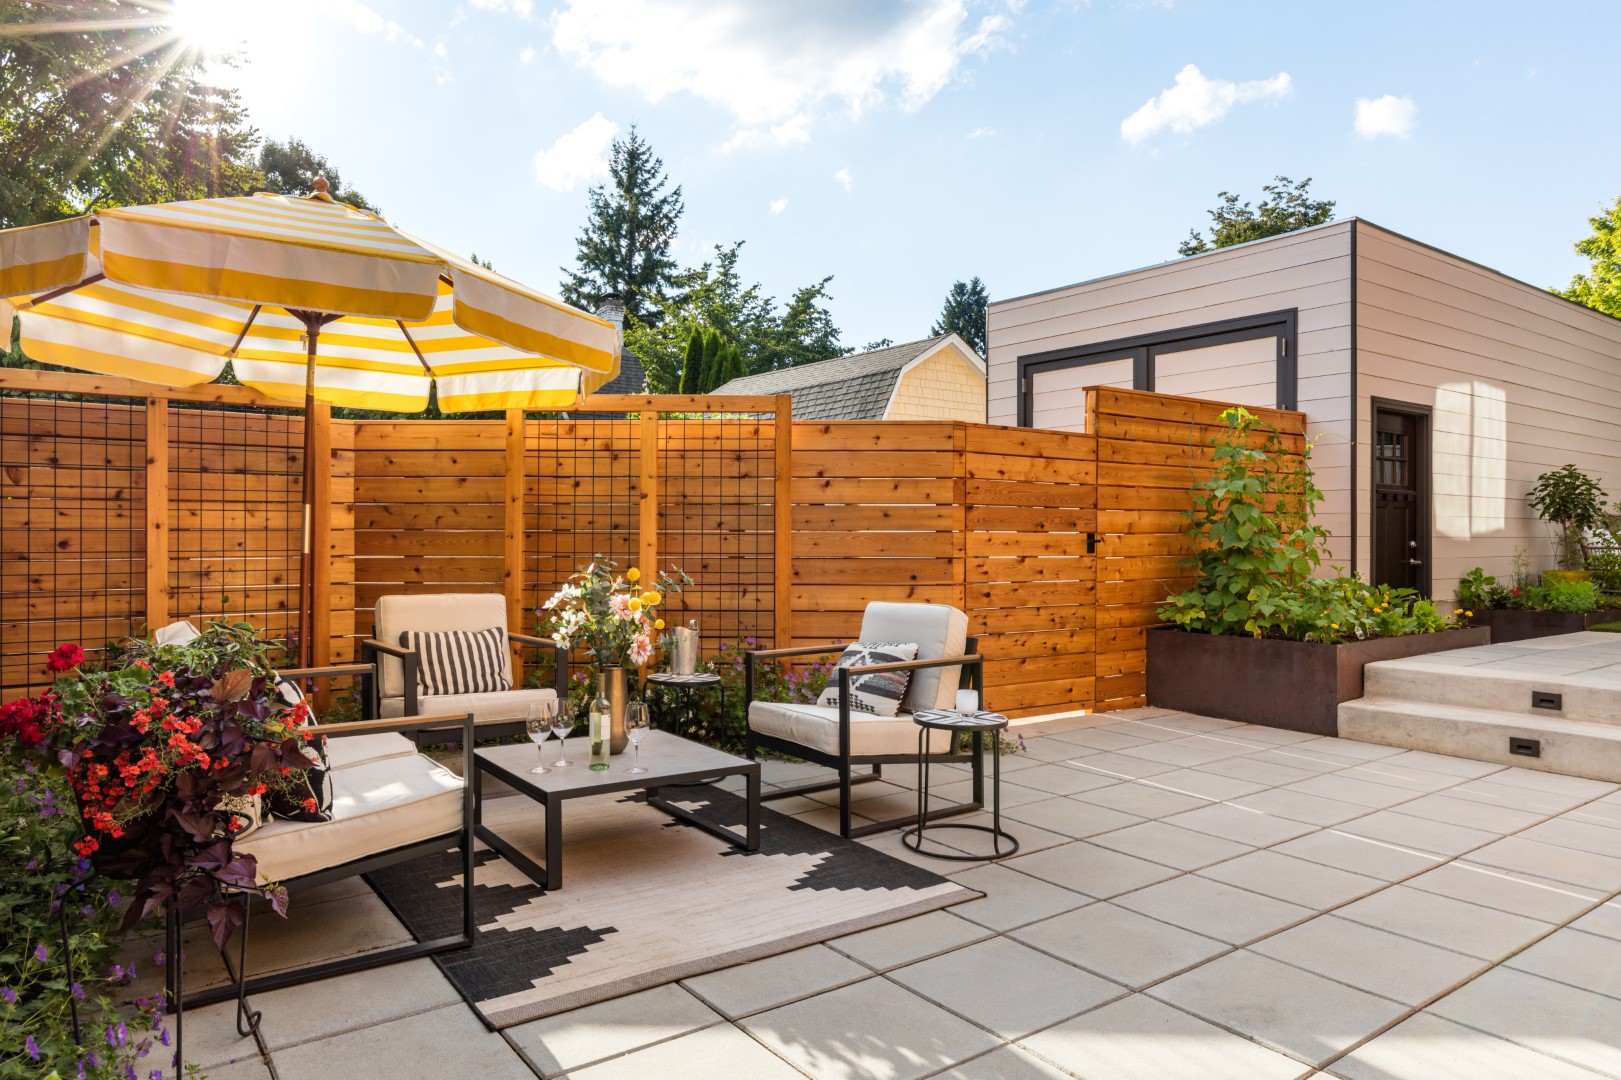 Outdoor Living at Its Finest: 16 Transitional Patio Designs to Inspire Your Space